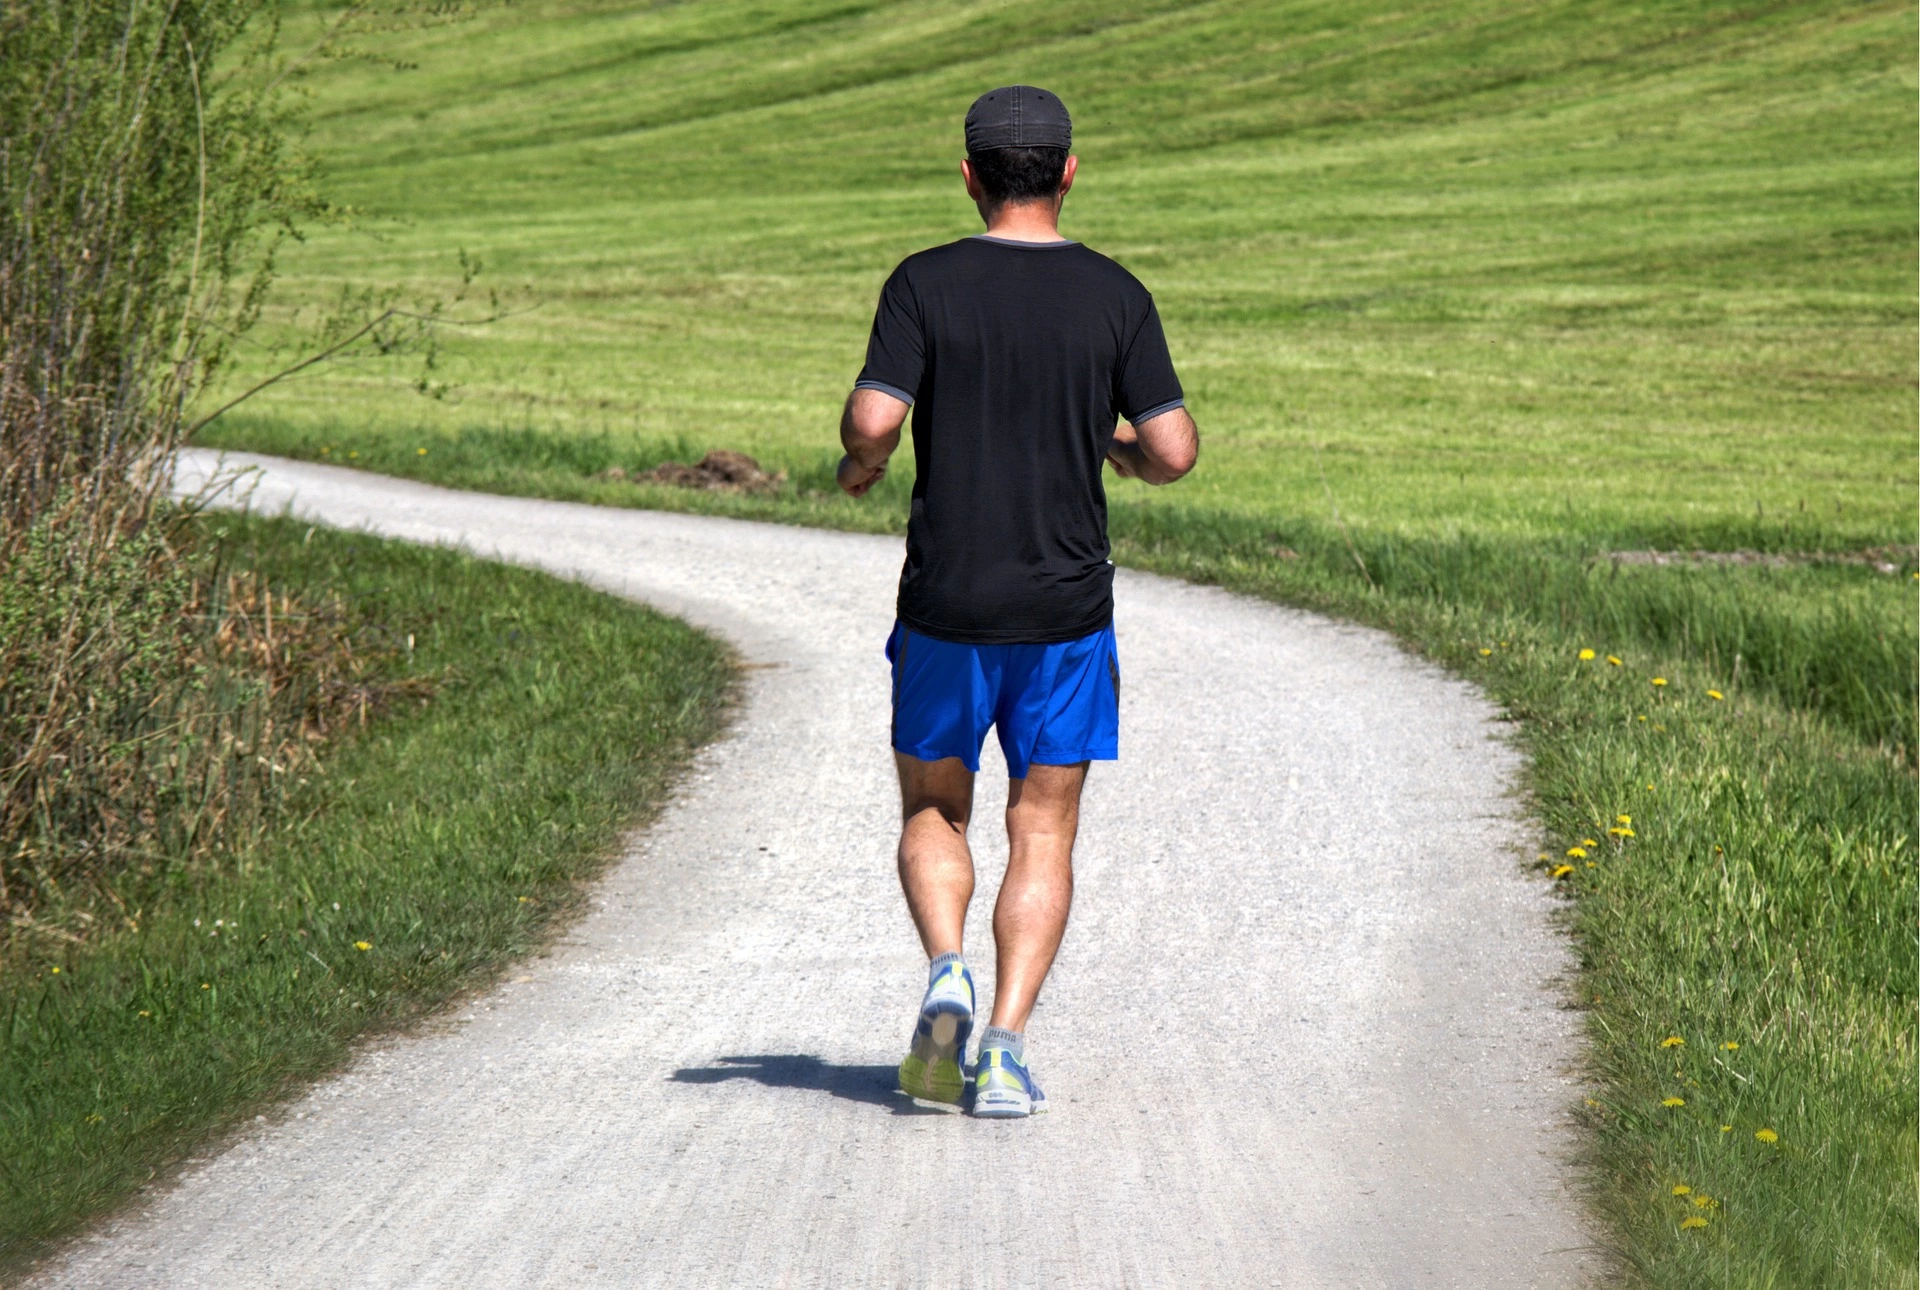 Study: 1-hour run may extend your life by 7 hours